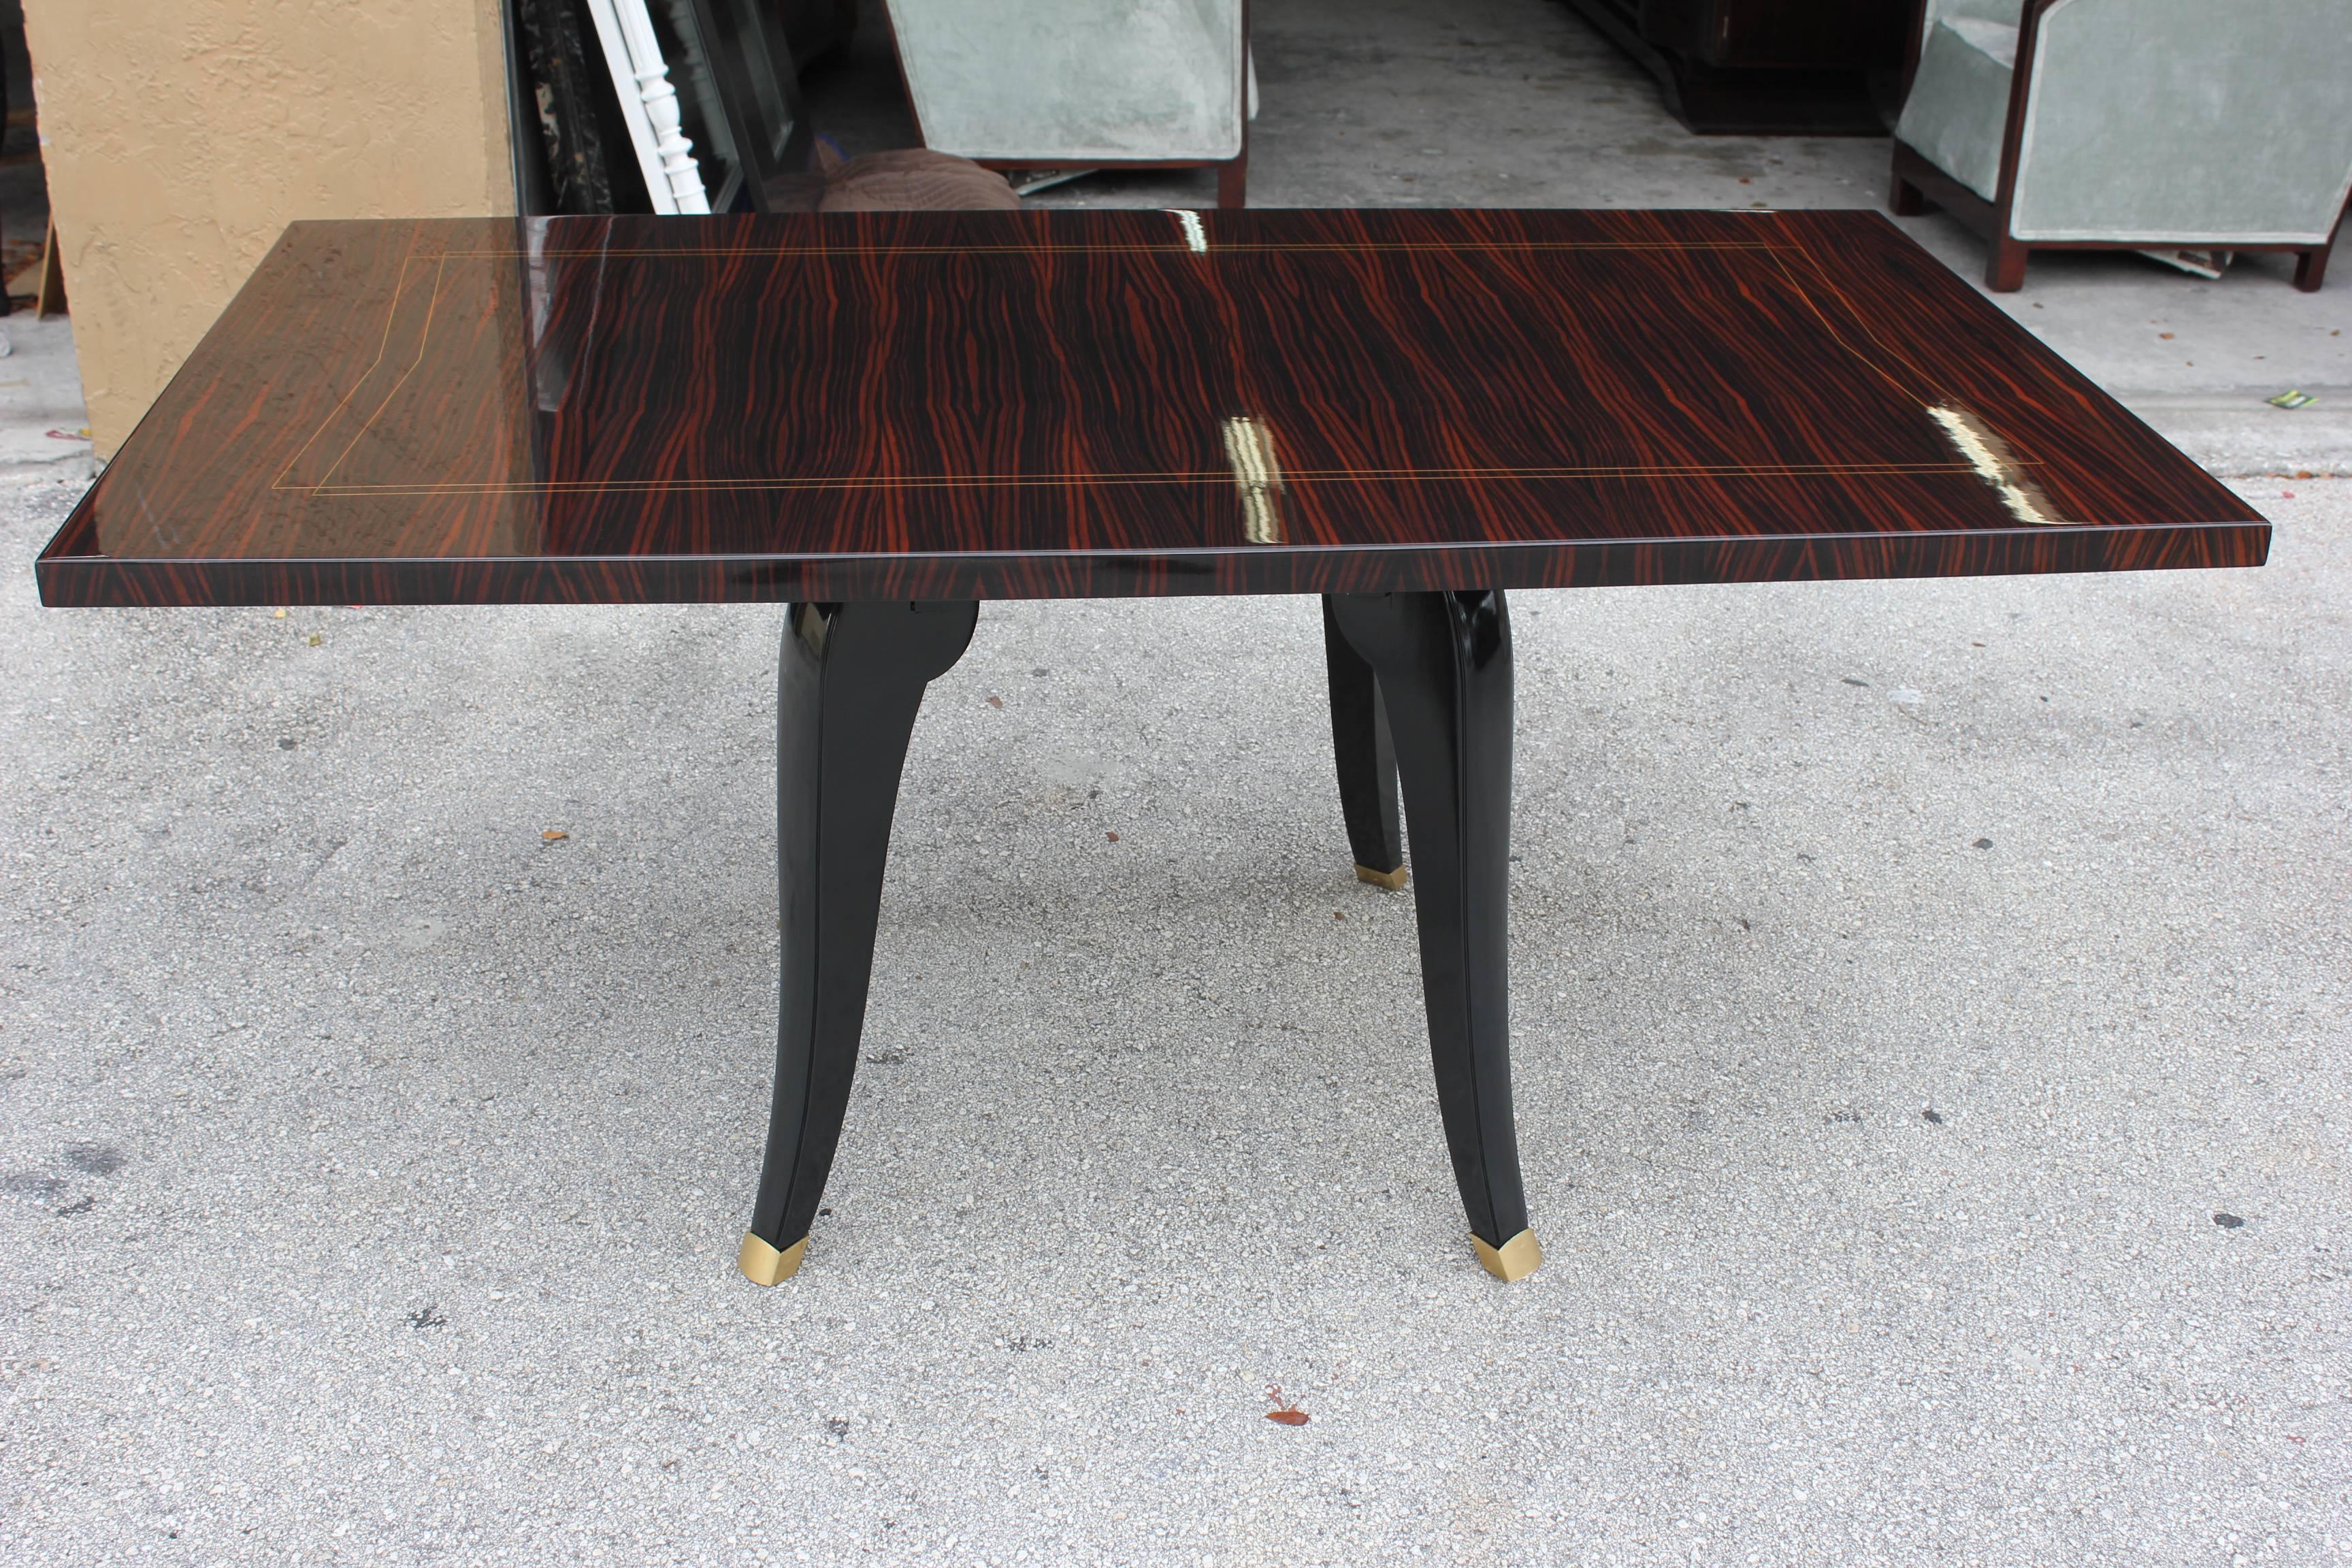 A French Art Deco exotic Macassar ebony sabre leg dining table, circa 1940s. Black lacquer legs. Newly refinished in a lacquer finish. Brass toe caps. This is a spectacular table and was acquired from a French Estate.